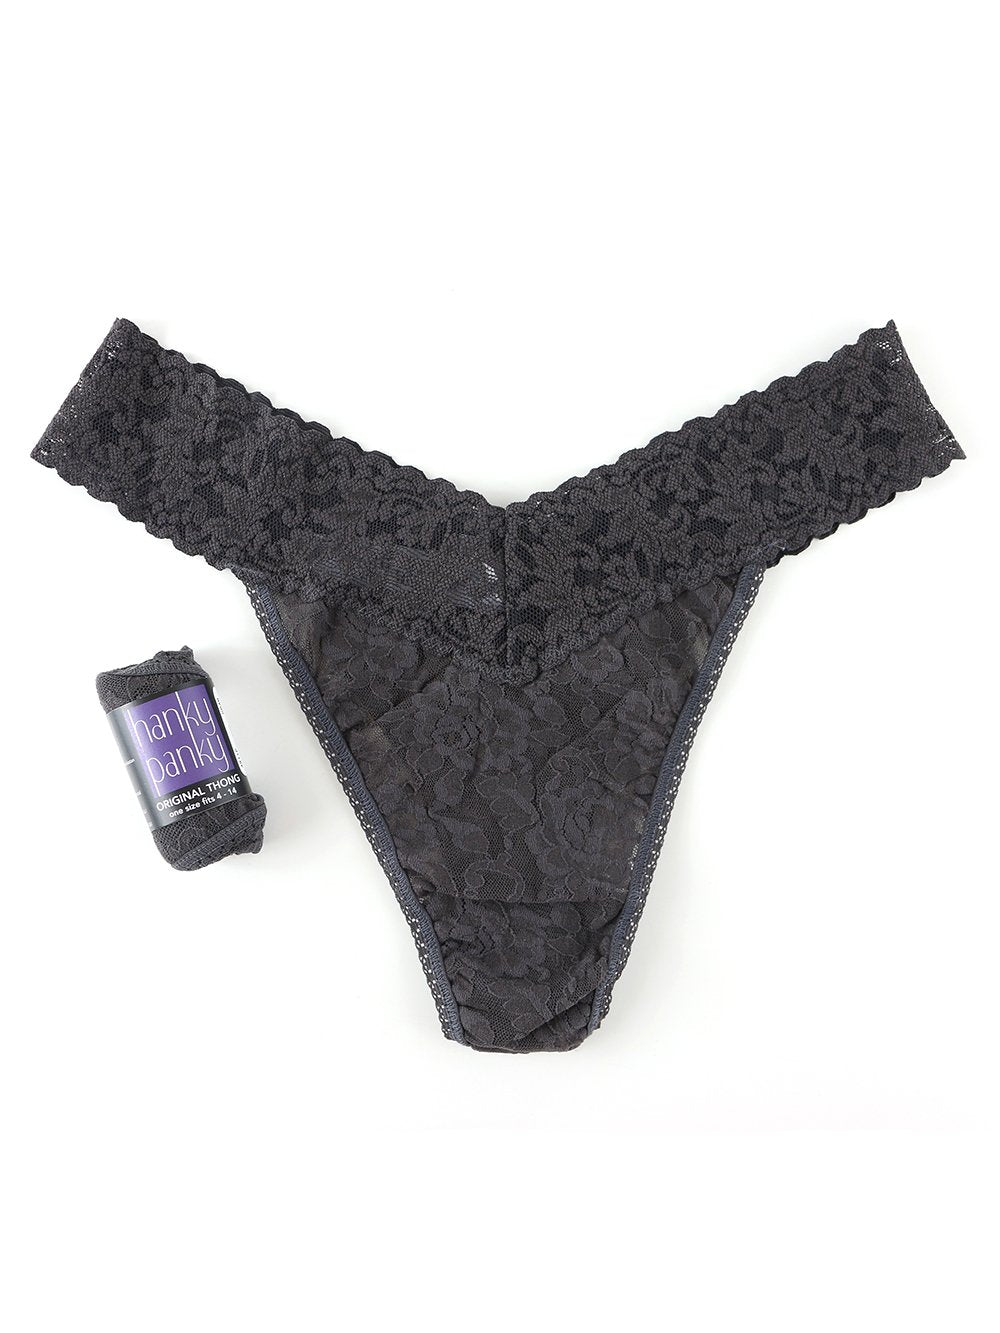 Hanky Panky Thong Granite / One Size Rolled Signature Lace Original Rise Thong